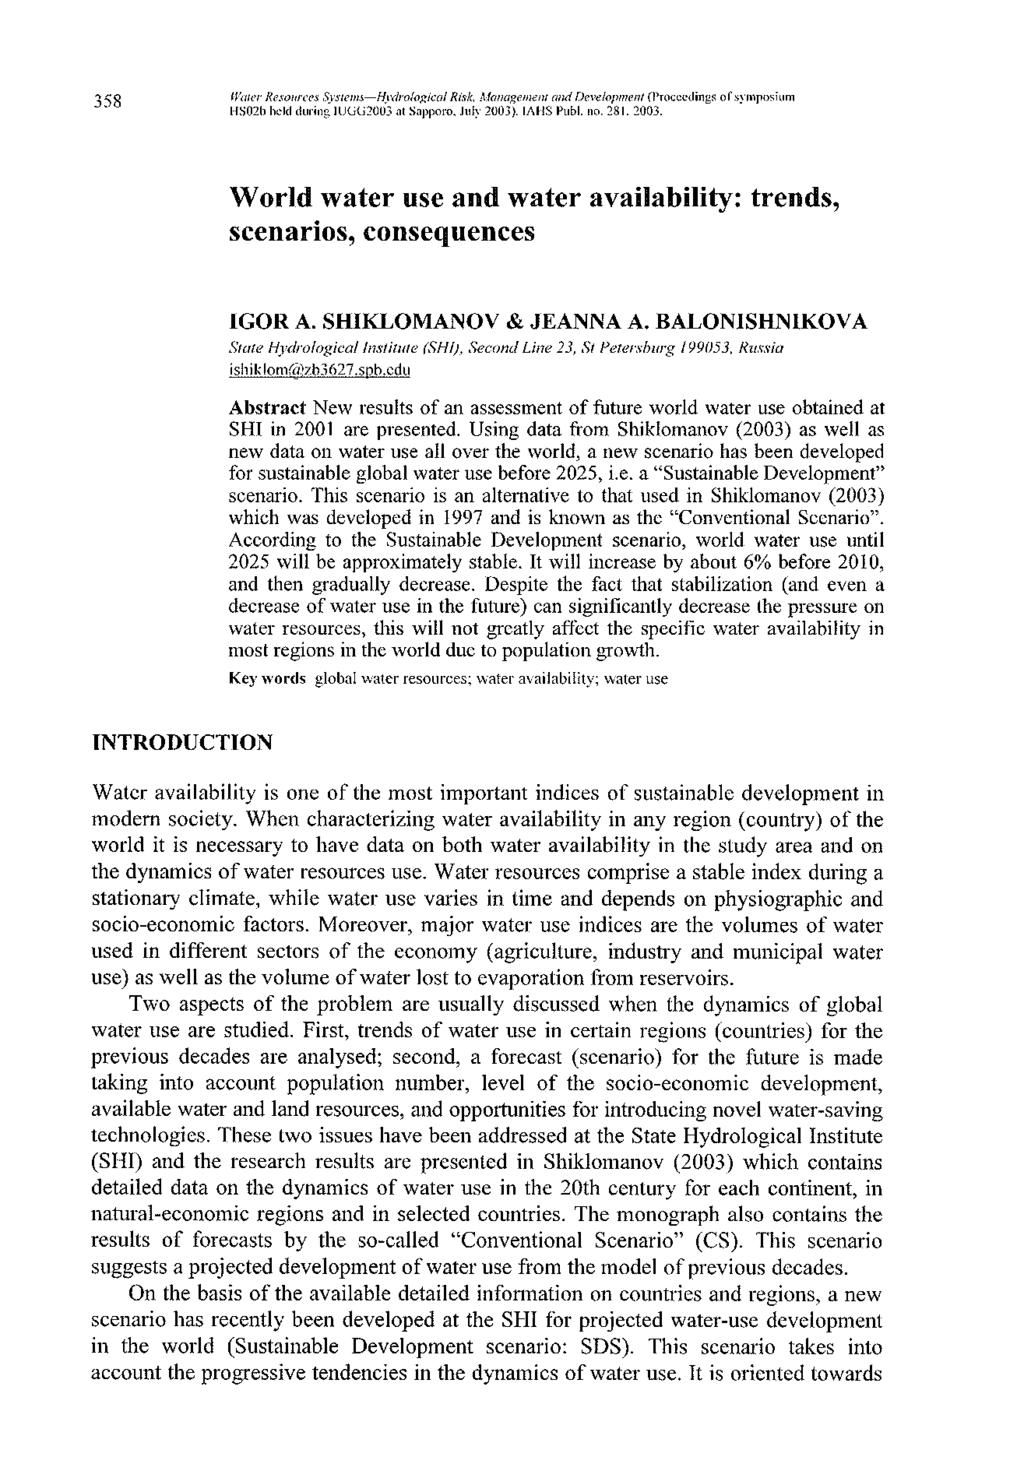 358 Water Resources Systems Hvclrologica! Risk, Management and Development (Proceedings of symposium HS02b held during IUGG2003 at Sapporo, July 2003). IAHS Publ. no. 281, 2003.